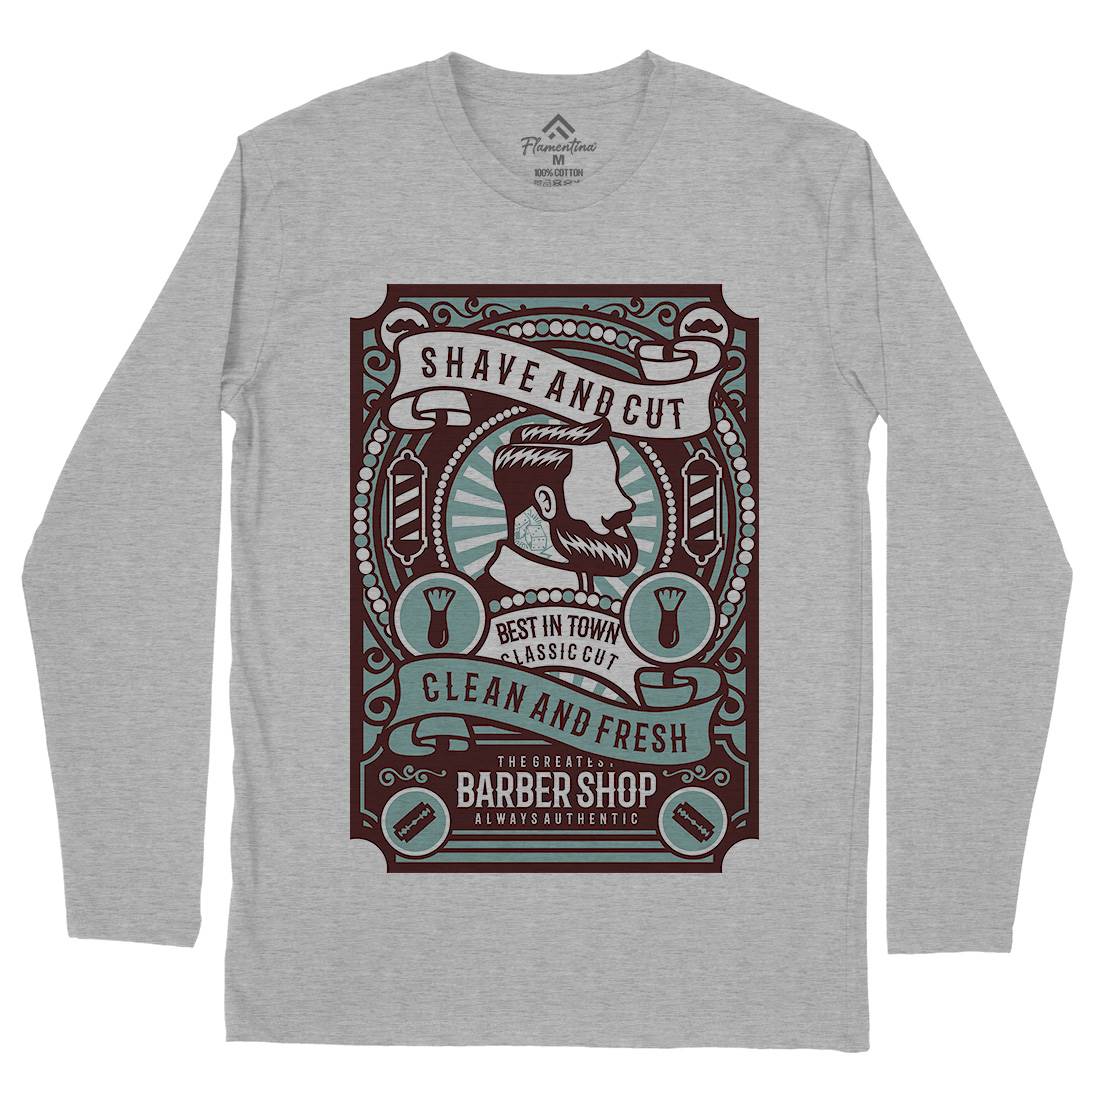 Shave And Cut Mens Long Sleeve T-Shirt Barber B254